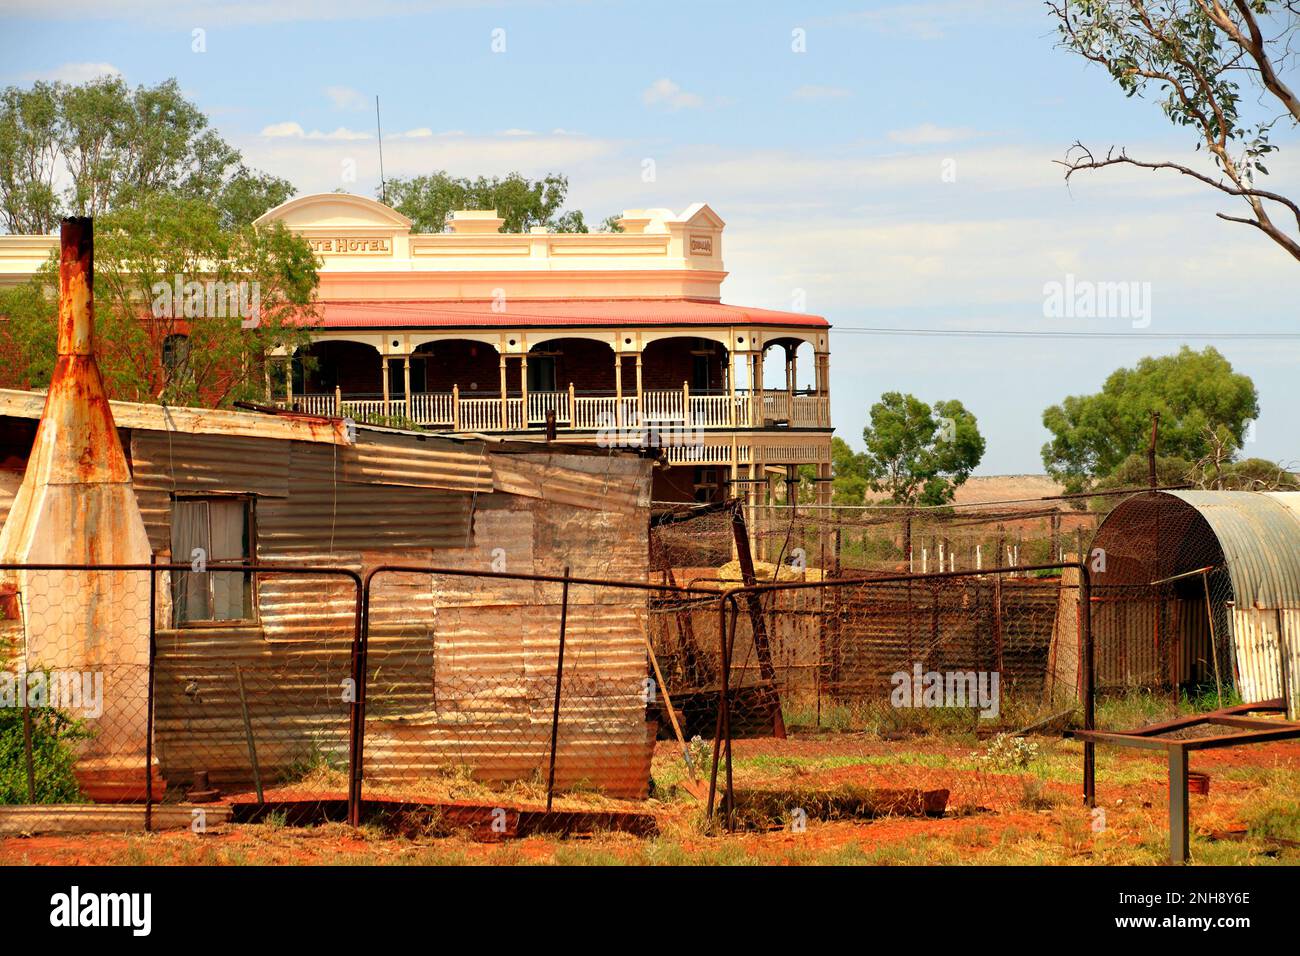 Iron clad building and State Hotel, Gwalia, historical gold mining town, Leonora, Western Australia Stock Photo